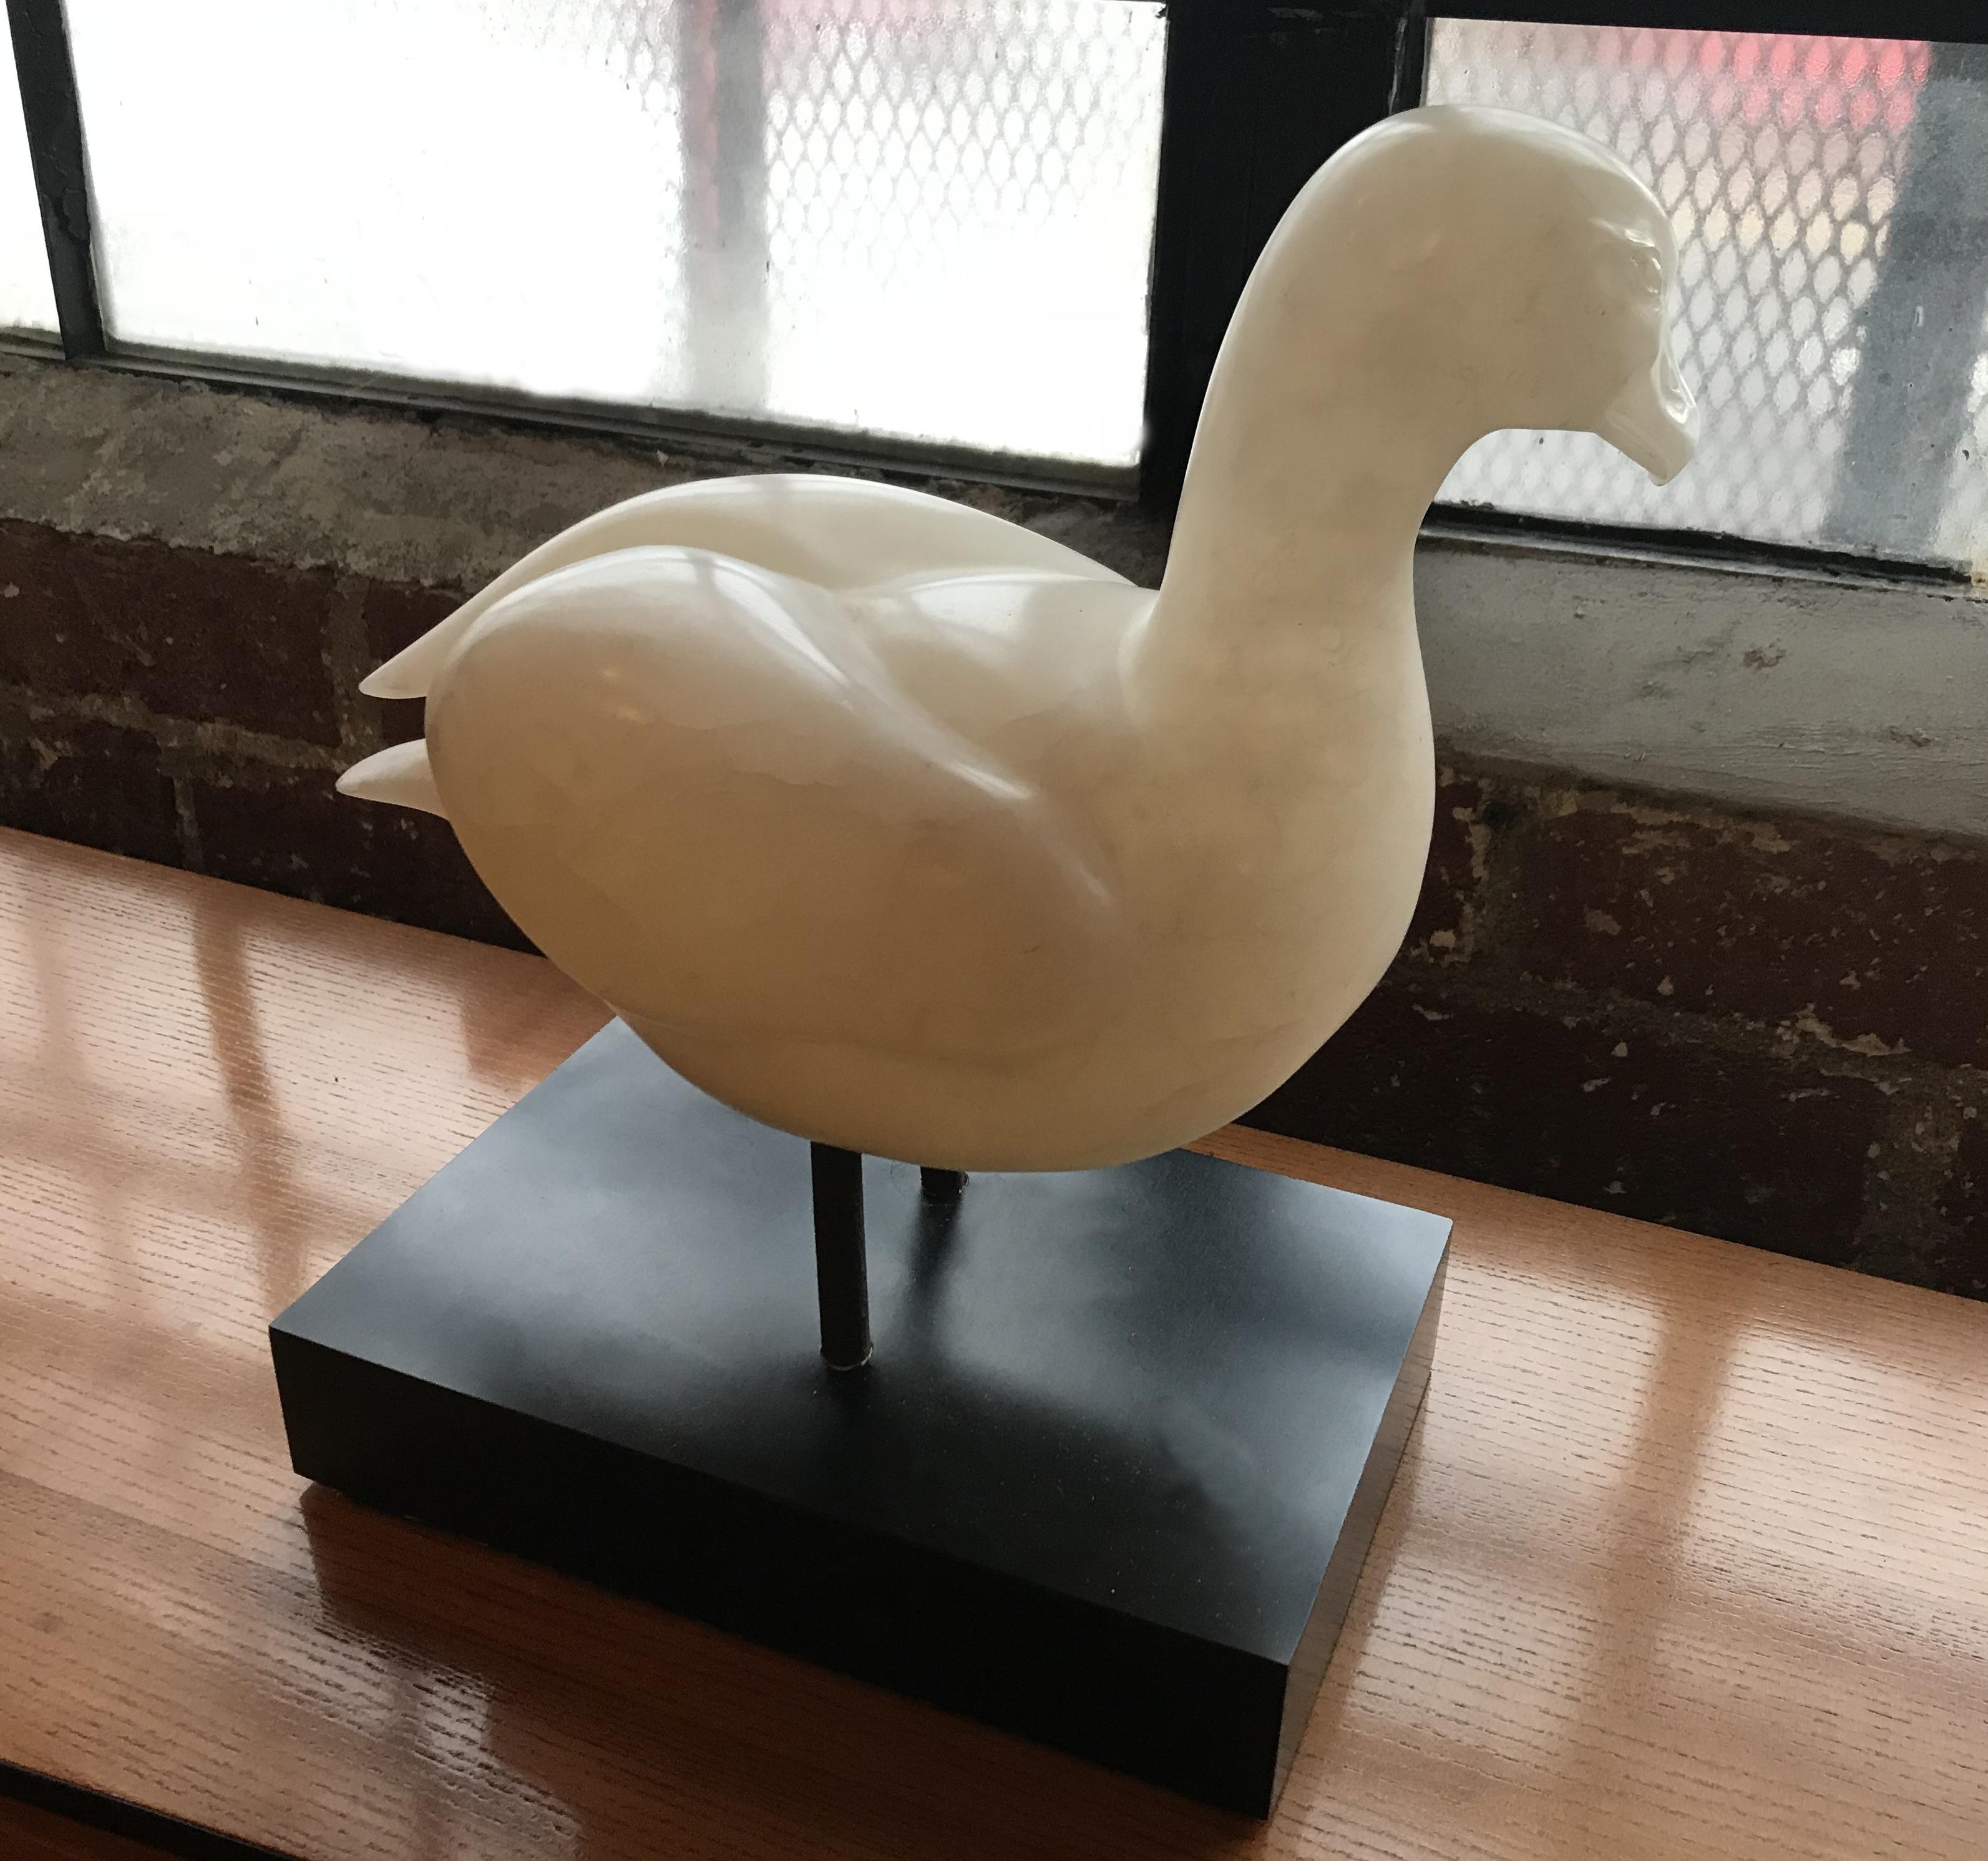 Handsome white alabaster sculpture of a duck, signed by artist T. Marvel in 1979. This serene and elegant piece is very finely executed. 
The wooden base made of black formica veneer, measures: L 11